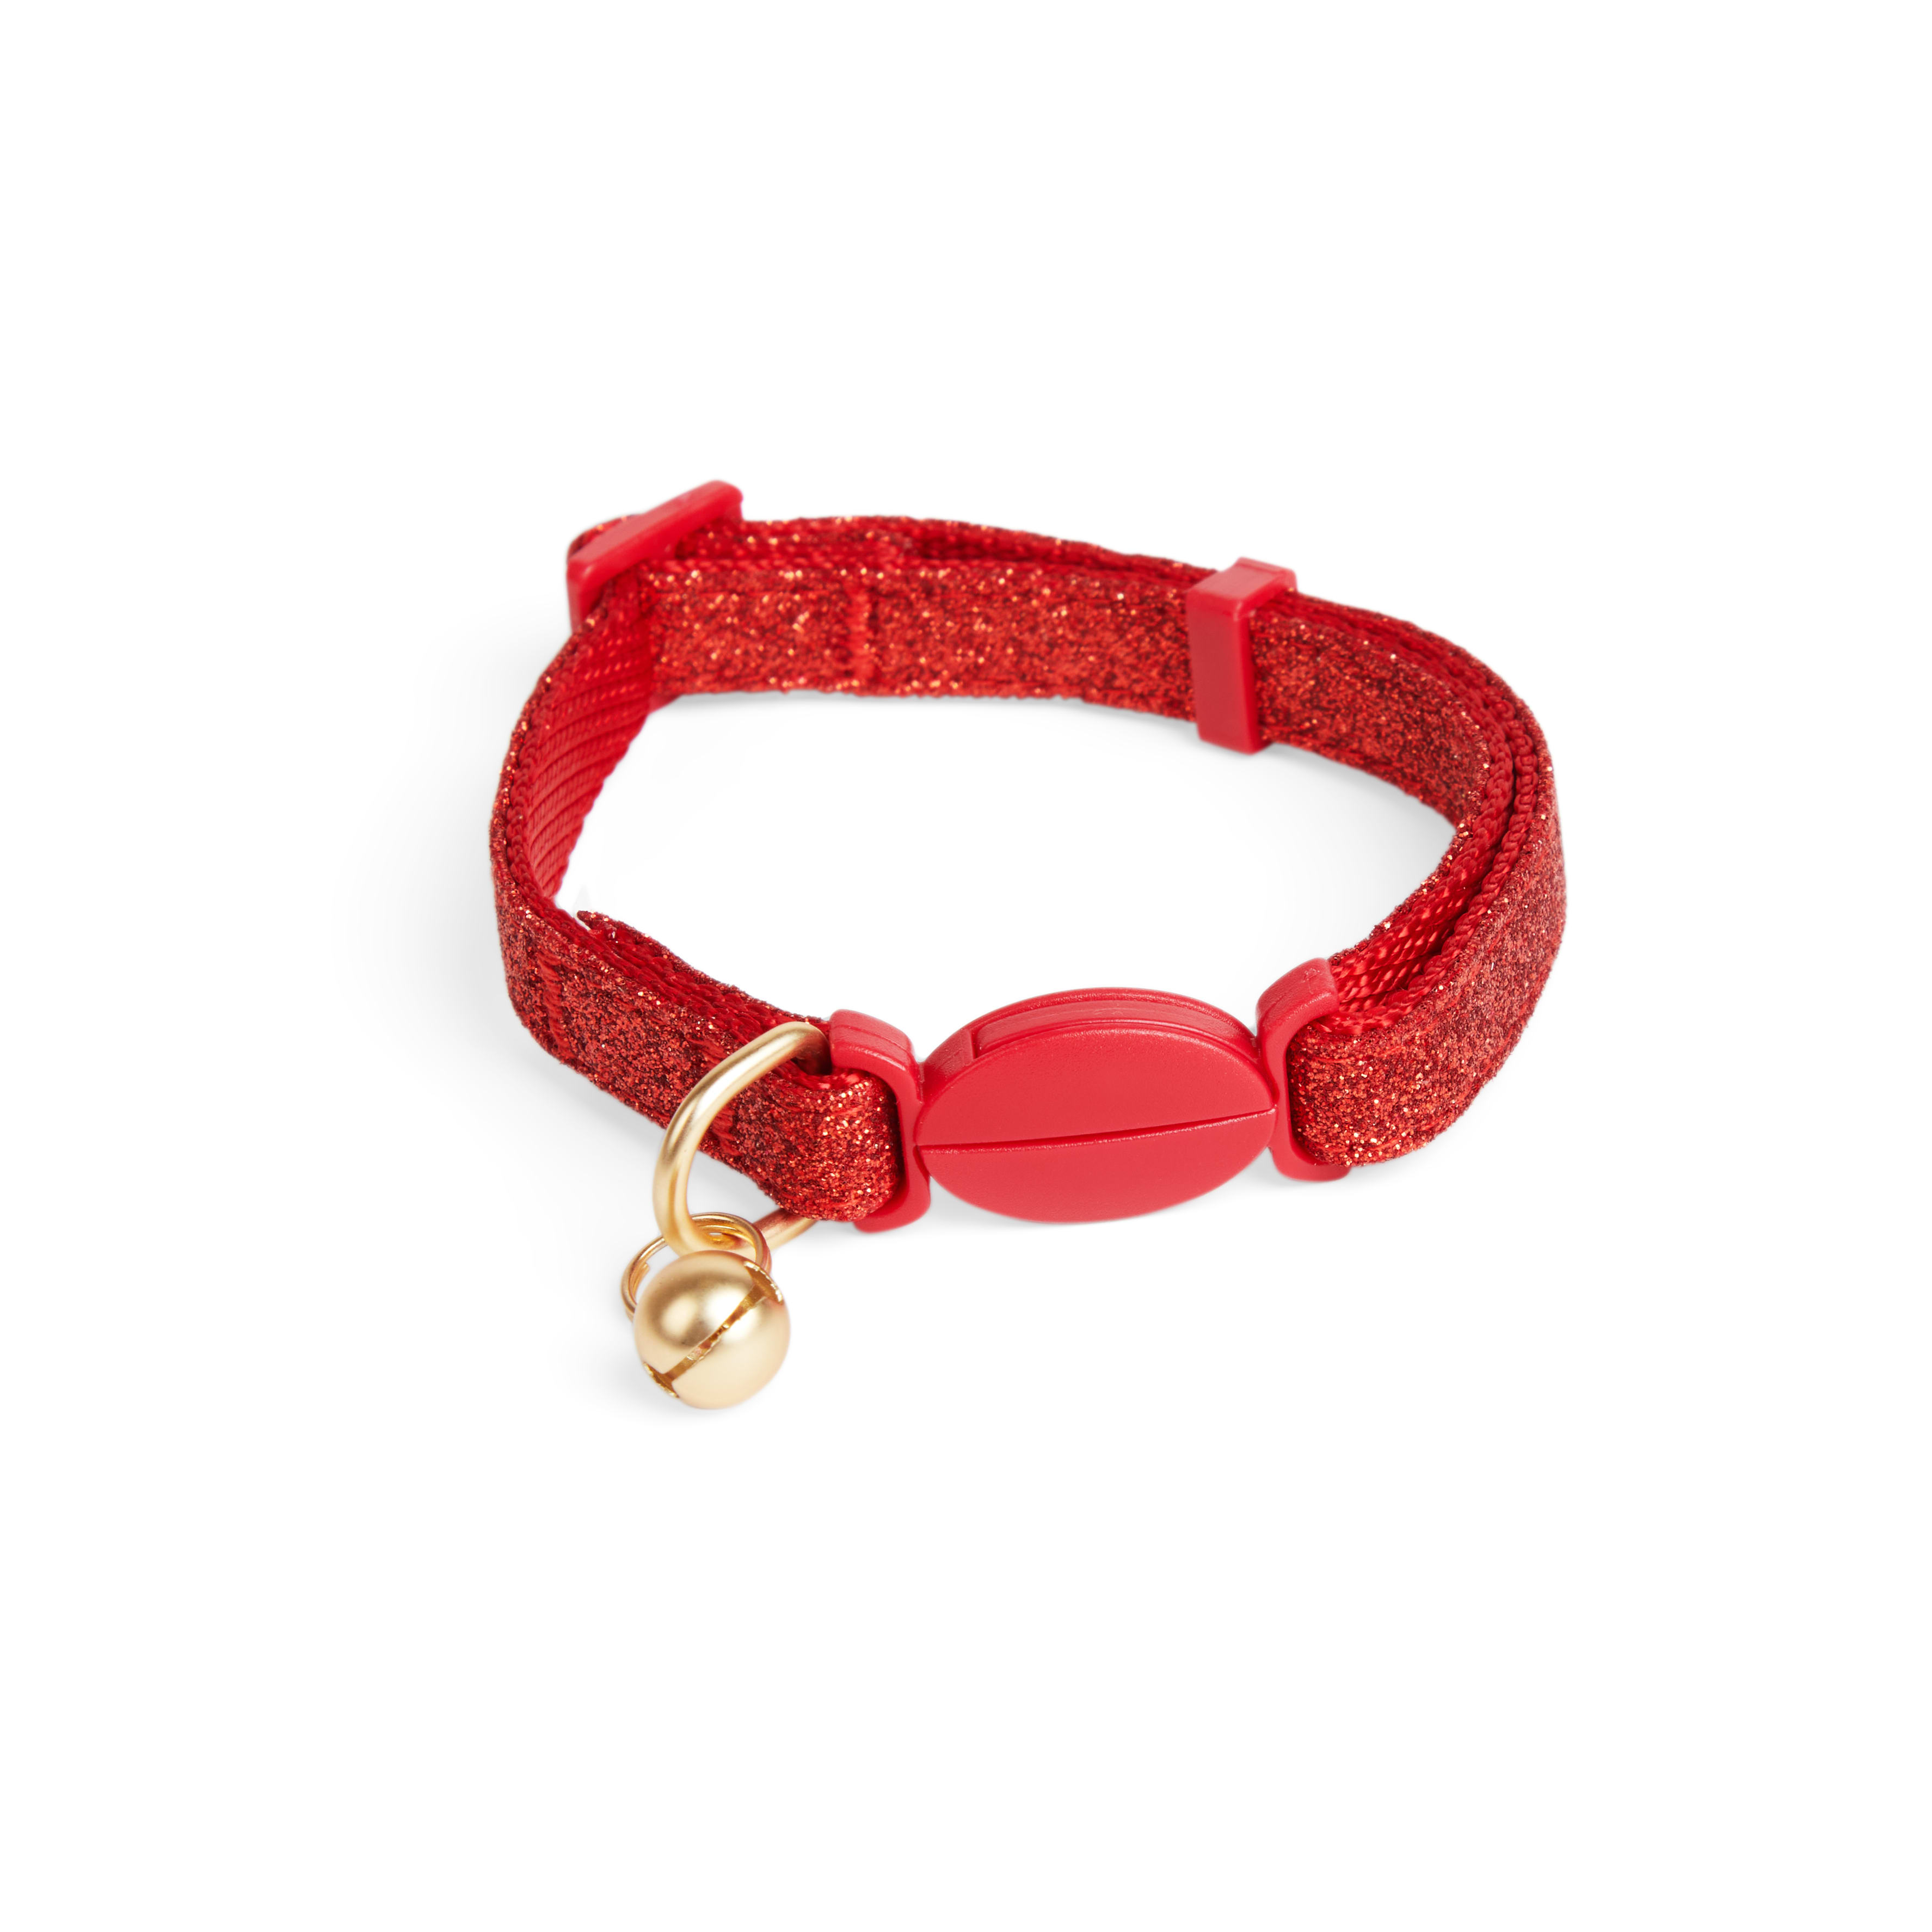 Cat Collar - Nautical Sunset - Coral Red Anchor & Lobster Cat Collar -  Made By Cleo